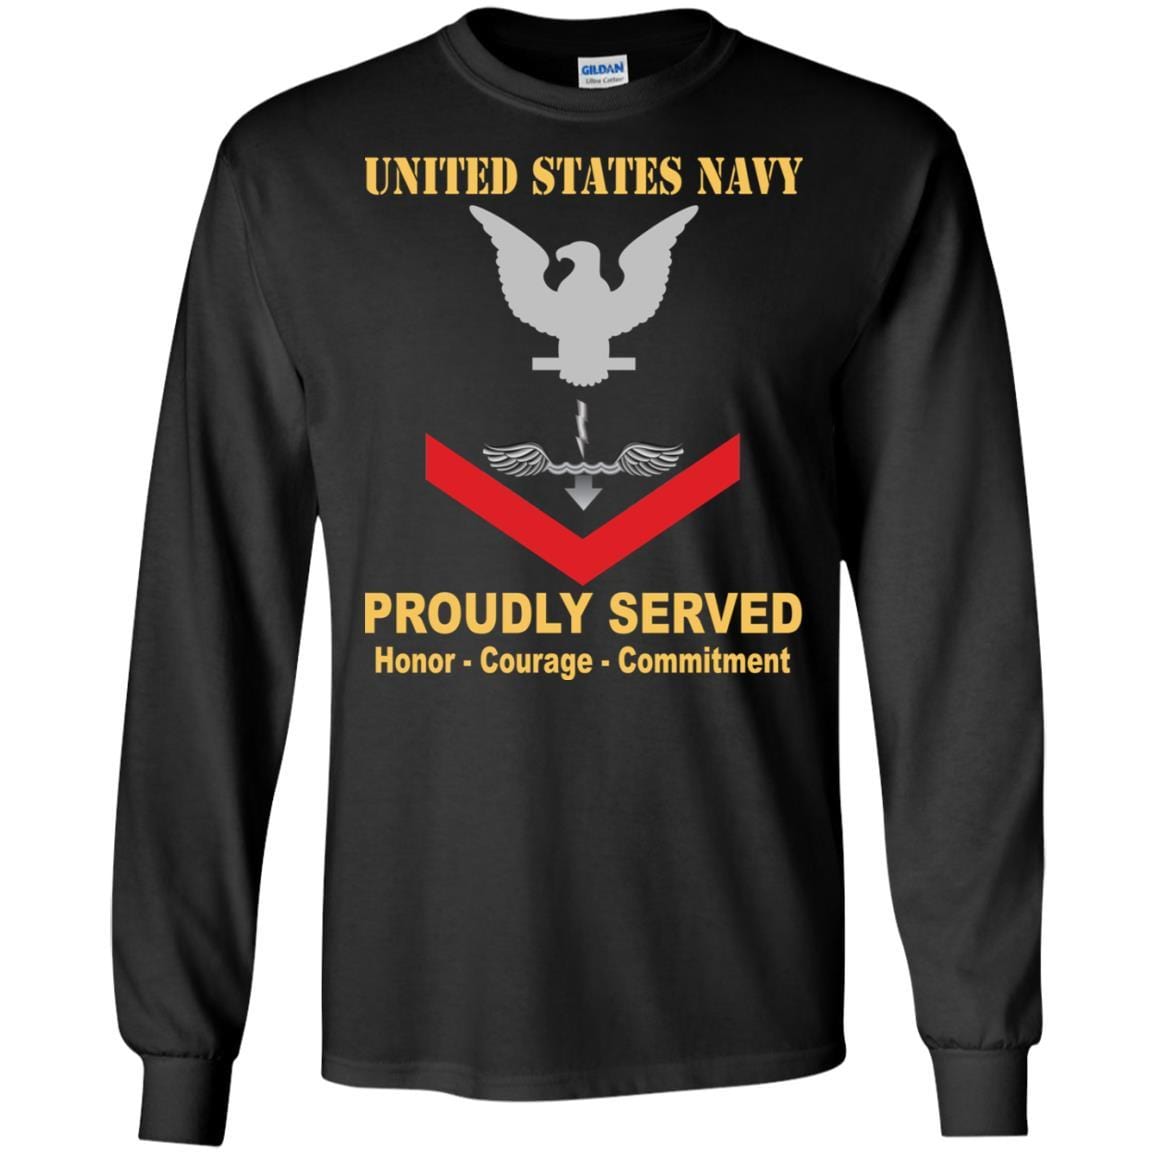 Navy Antisubmarine Warfare Technician Navy AX E-4 Rating Badges Proudly Served T-Shirt For Men On Front-TShirt-Navy-Veterans Nation